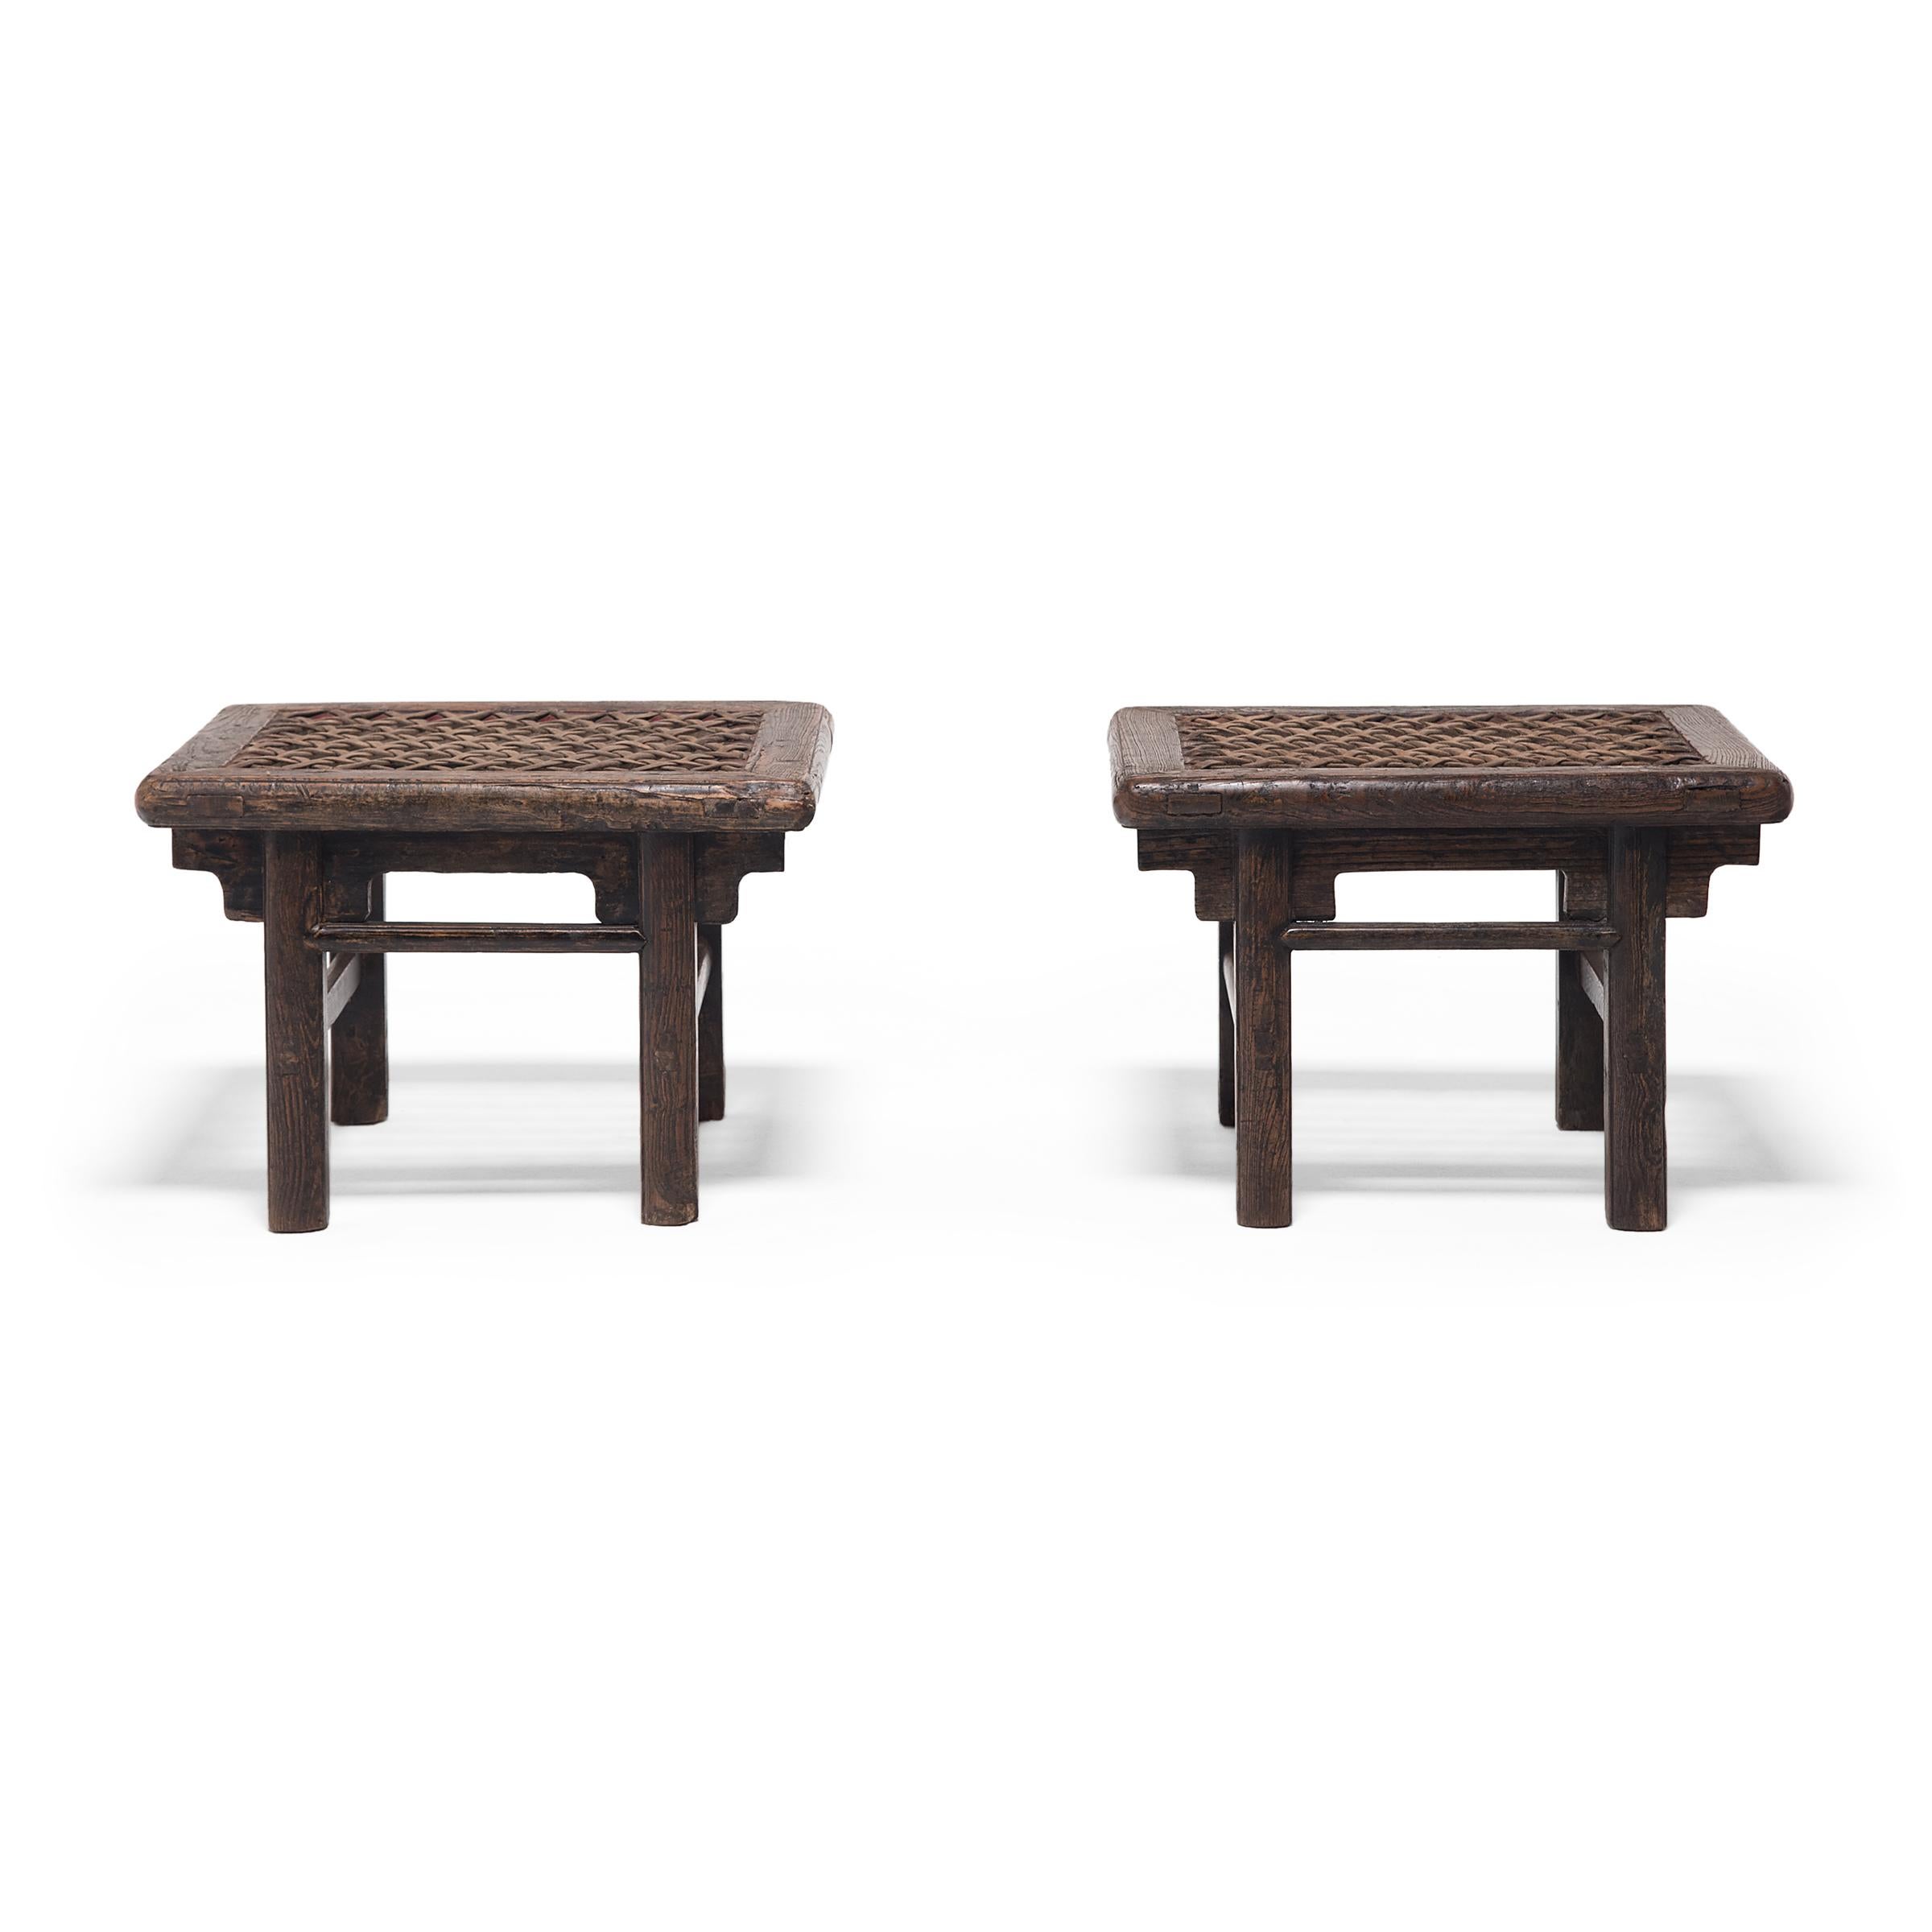 Qing Pair of Chinese Square Stools with Woven Hide Tops, c. 1850